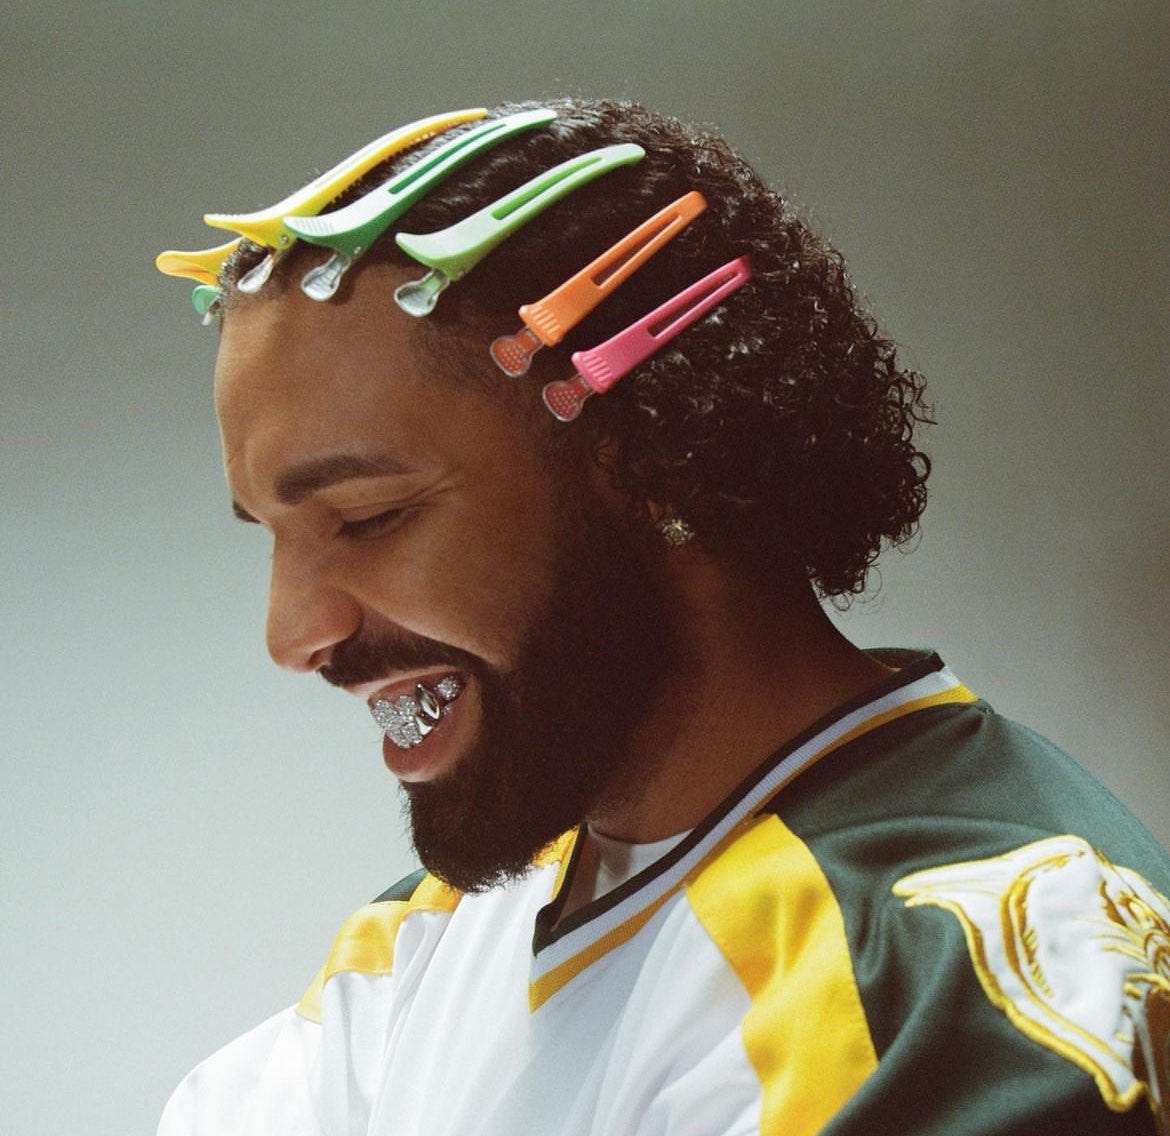 Pop Tingz on X: "Drake sports hair clips in new photo for his album, “For  All The Dogs”. https://t.co/rceUD7Uxkp" / X